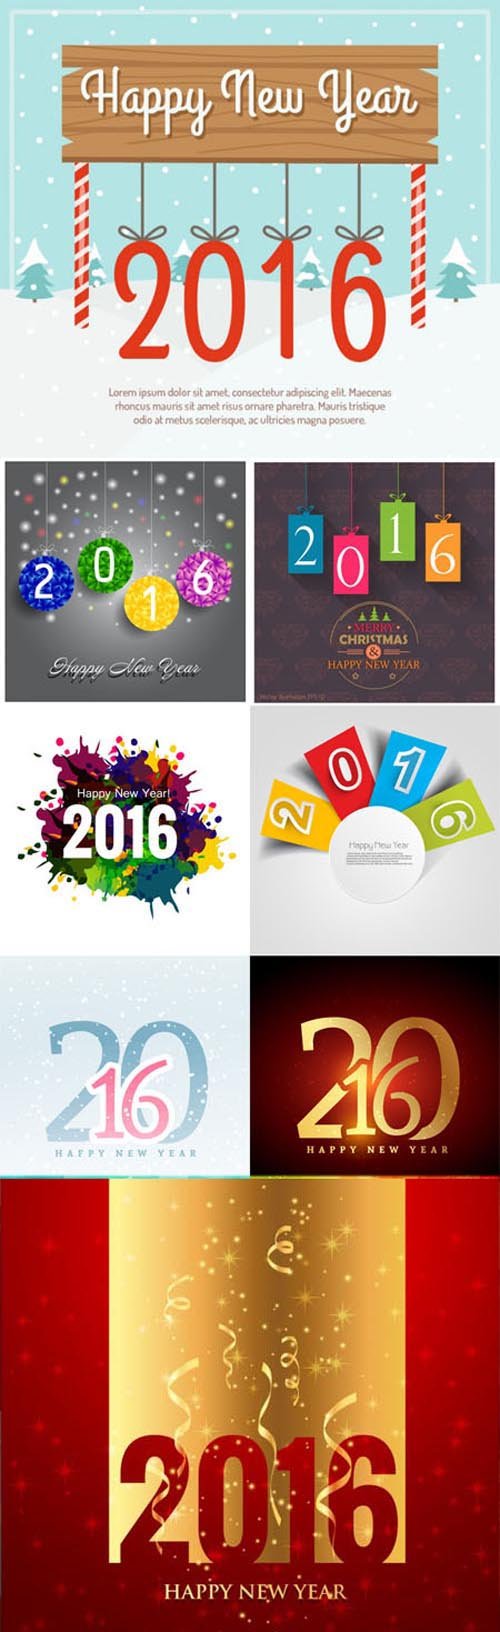 2016 New Year Backgrounds Vector [Vol.1]